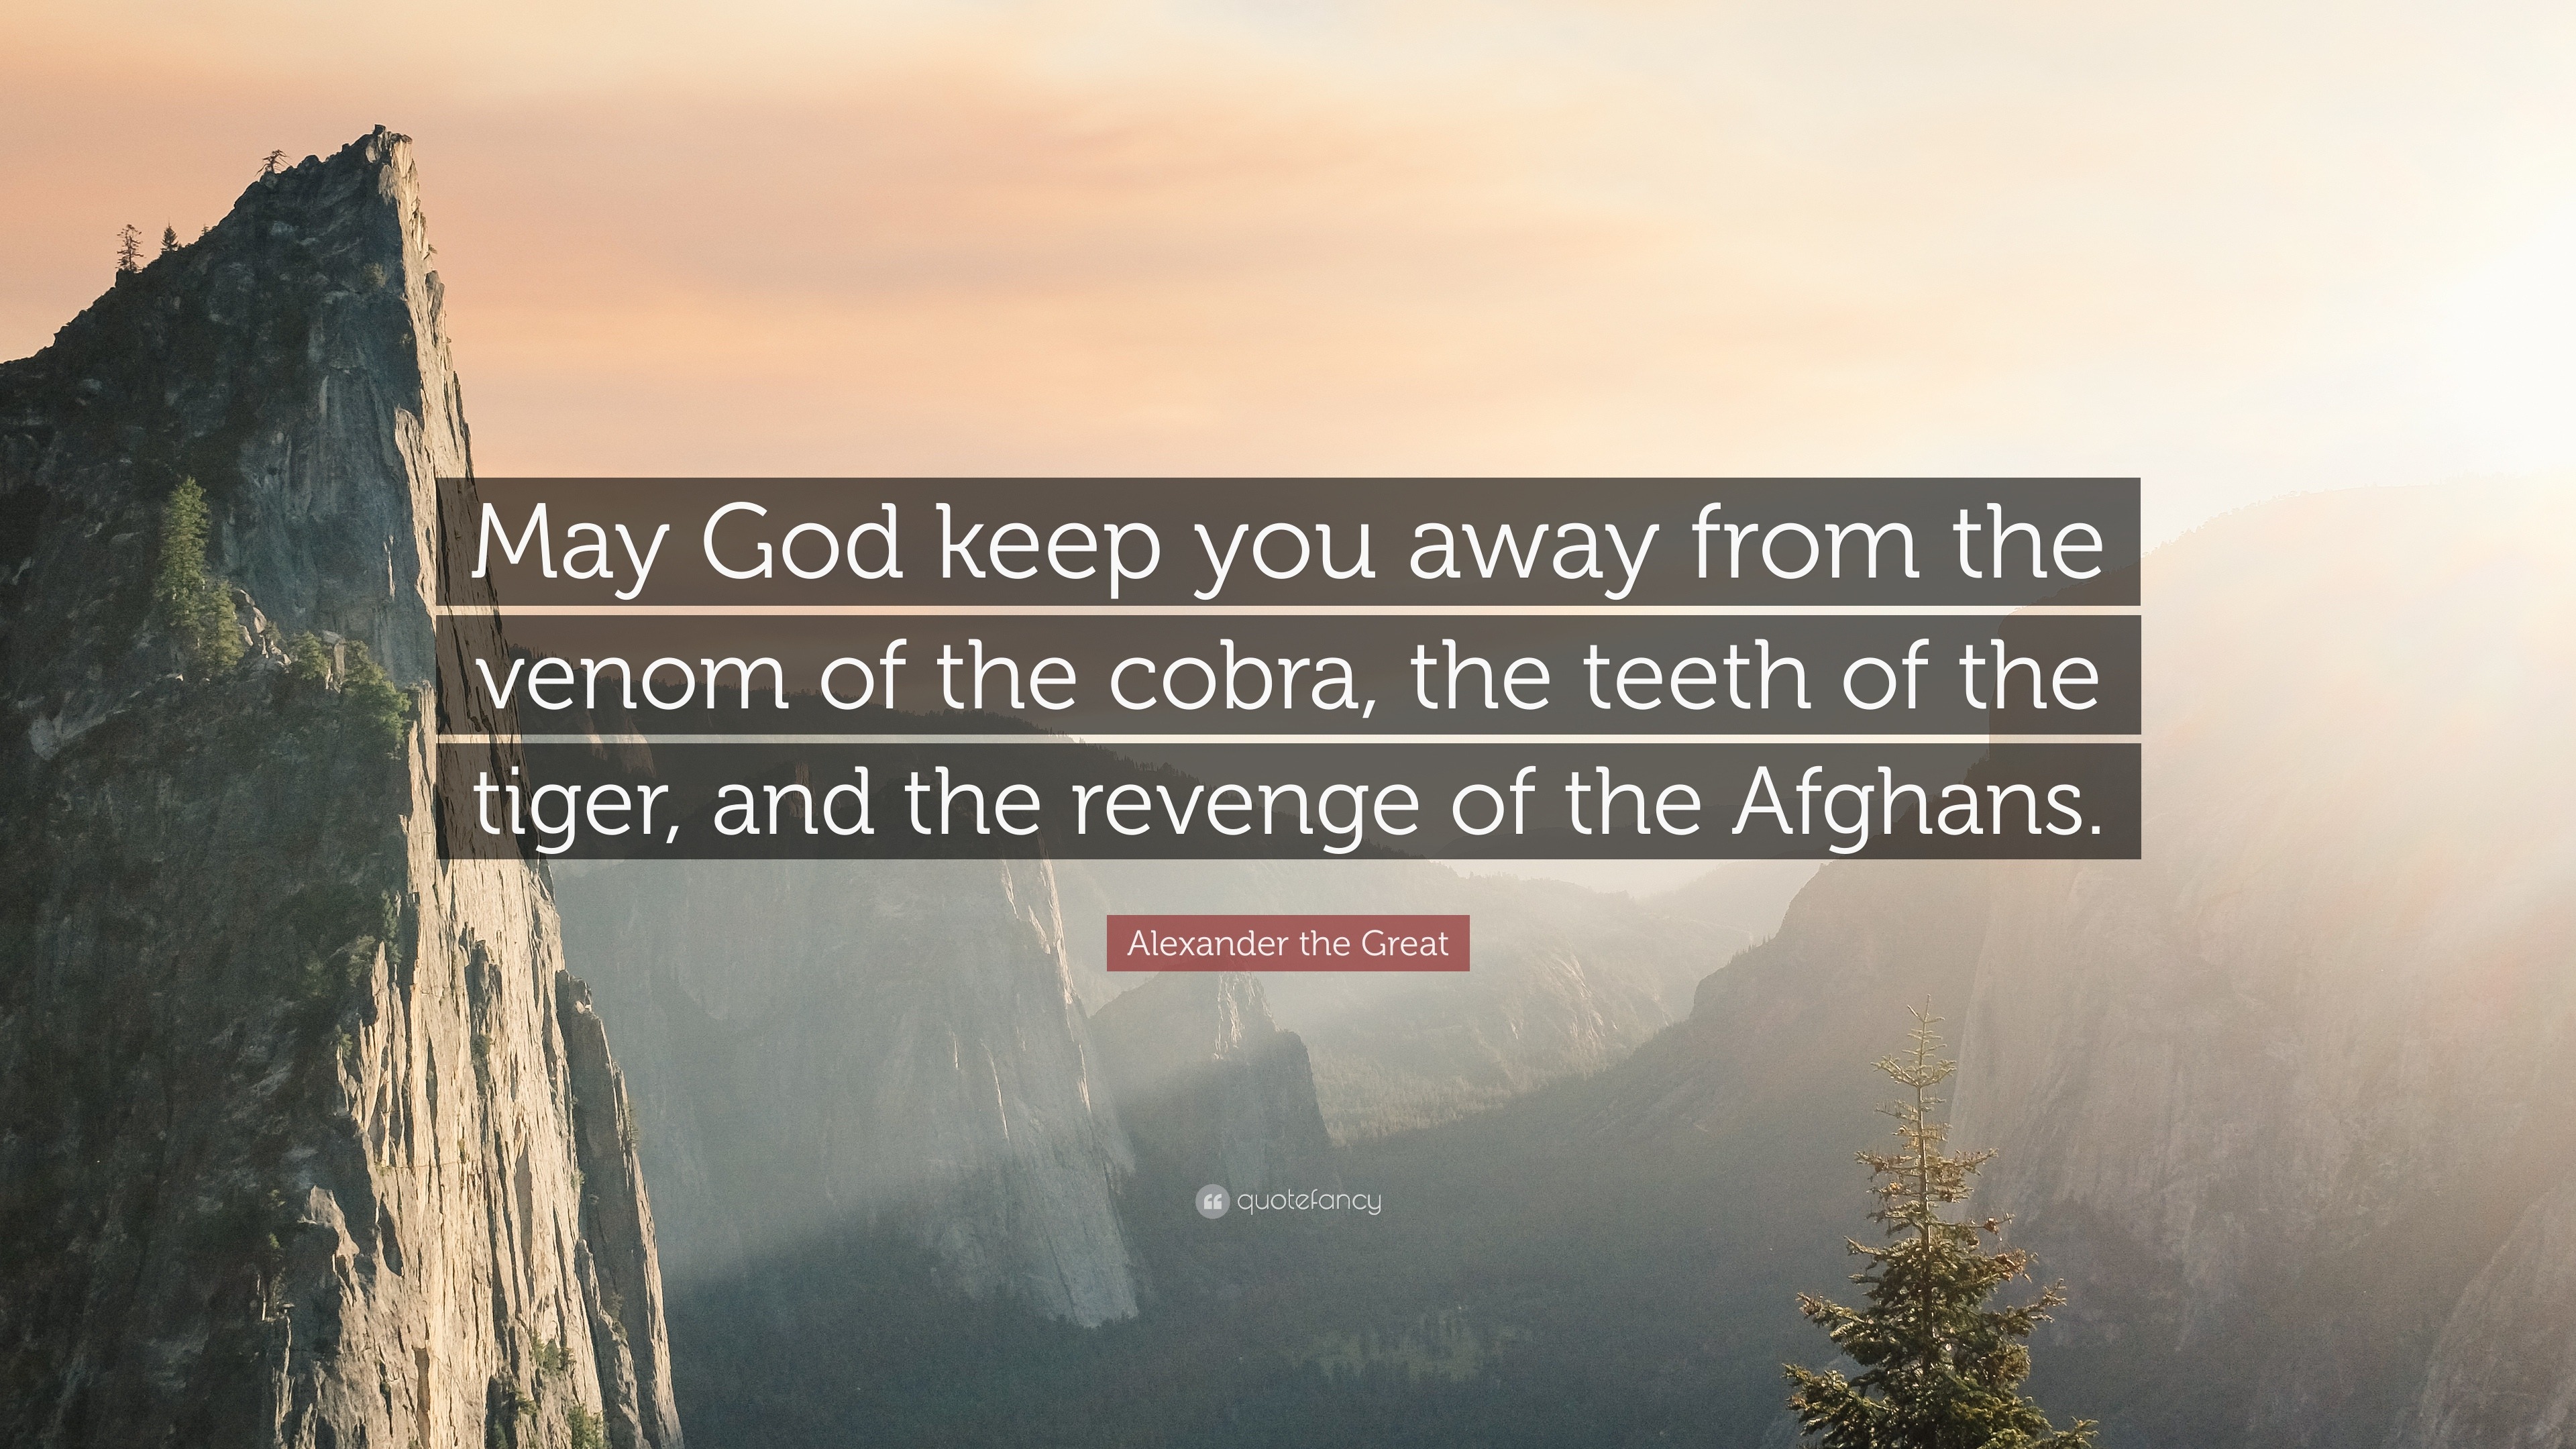 alexander-the-great-quote-may-god-keep-you-away-from-the-venom-of-the